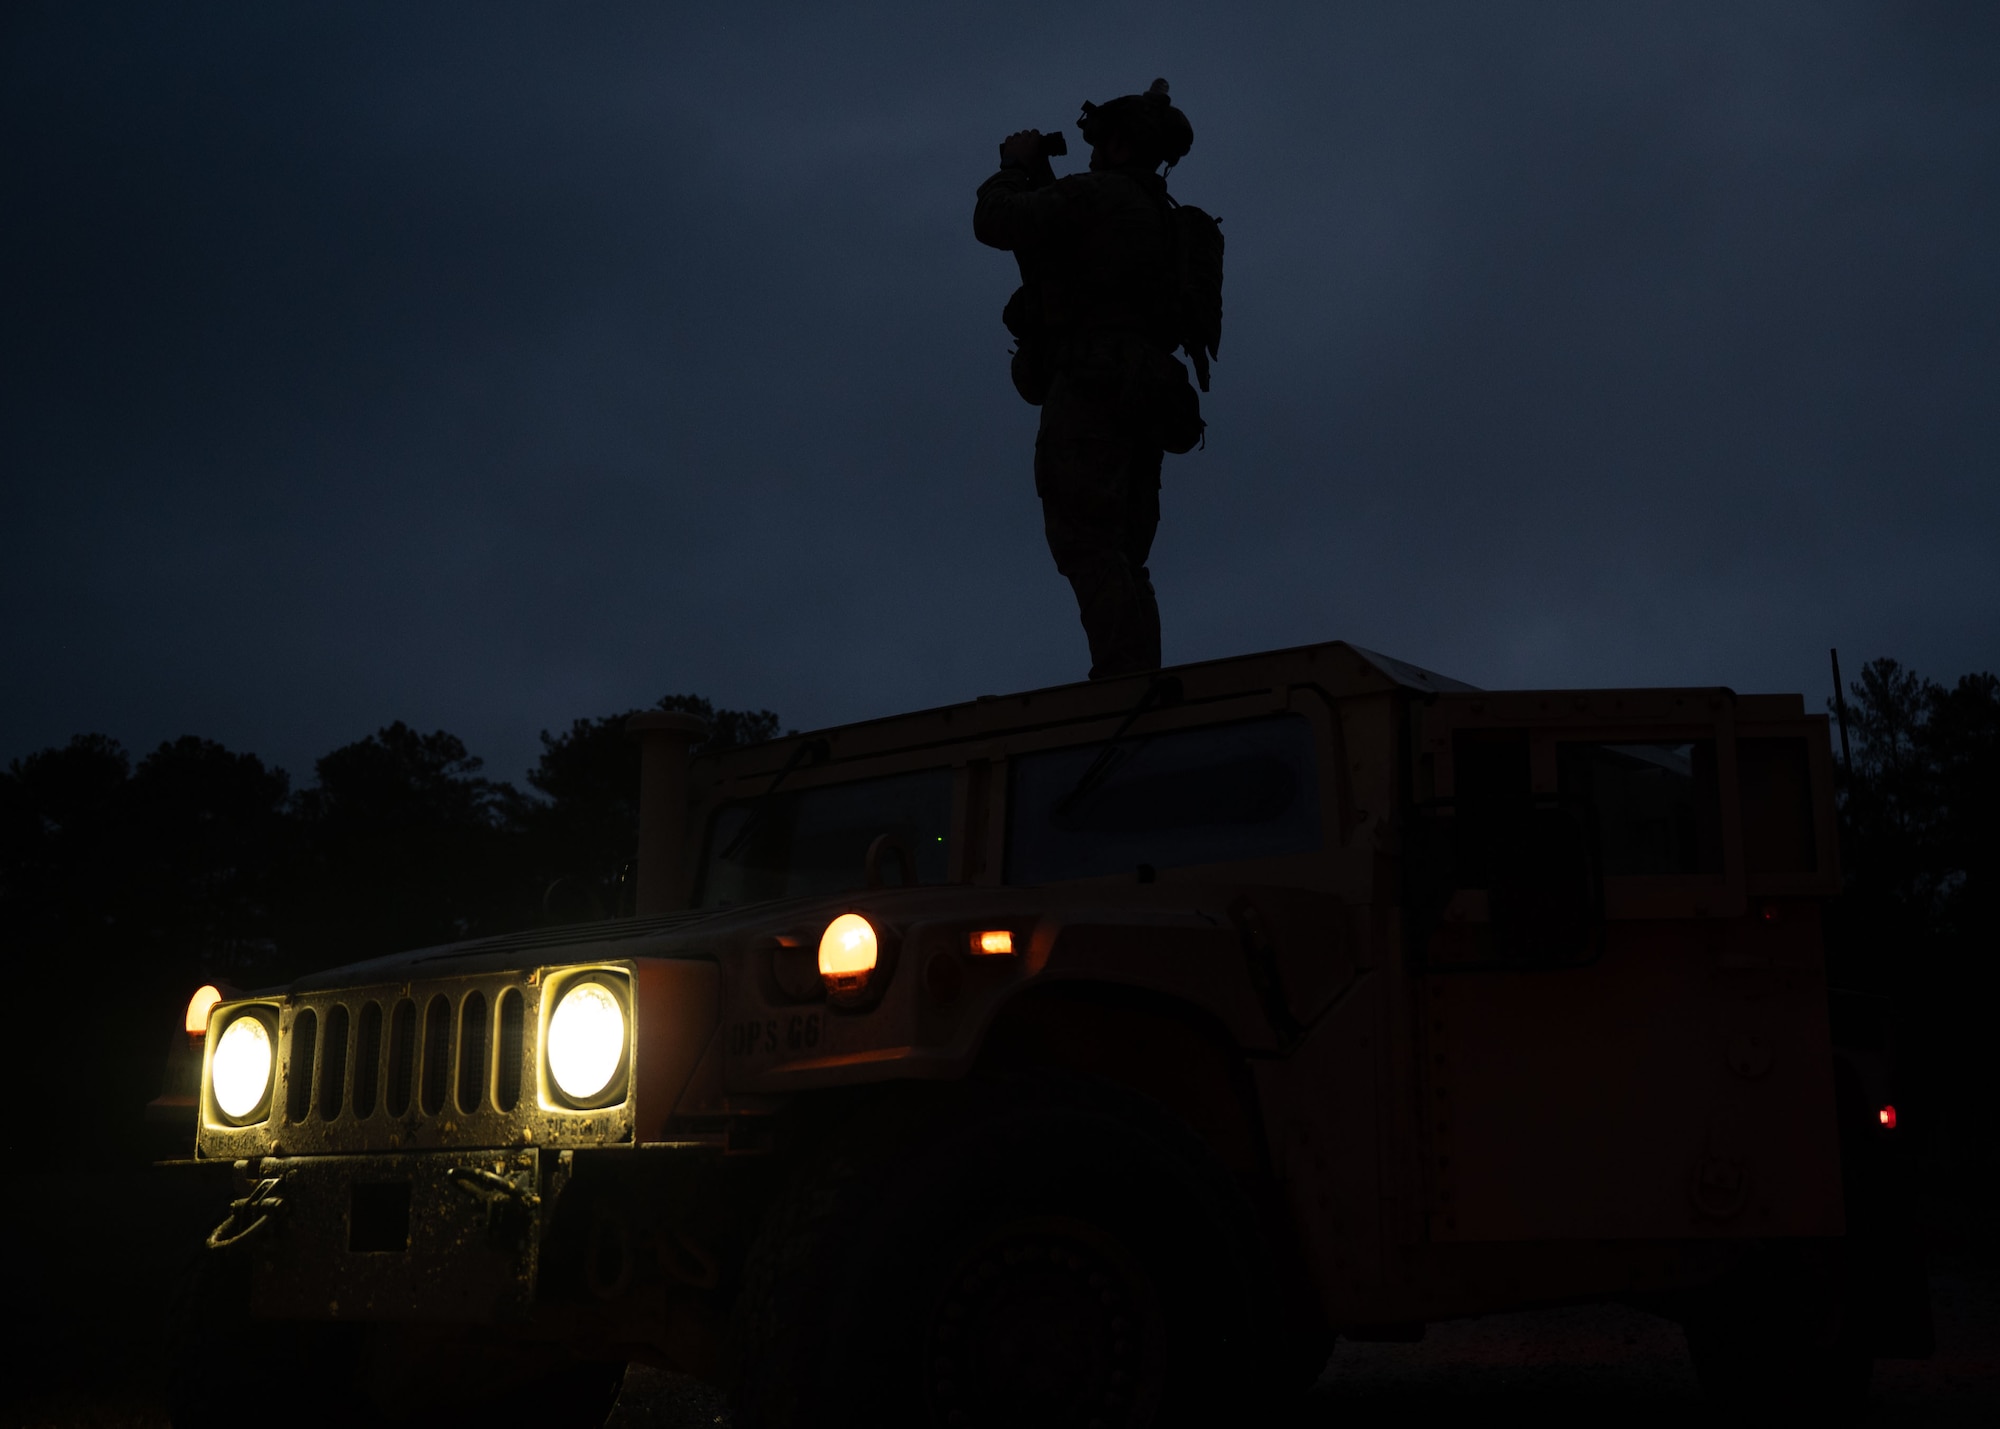 A man stands on the roof of a hummer with binoculars in the dark early morning hours.